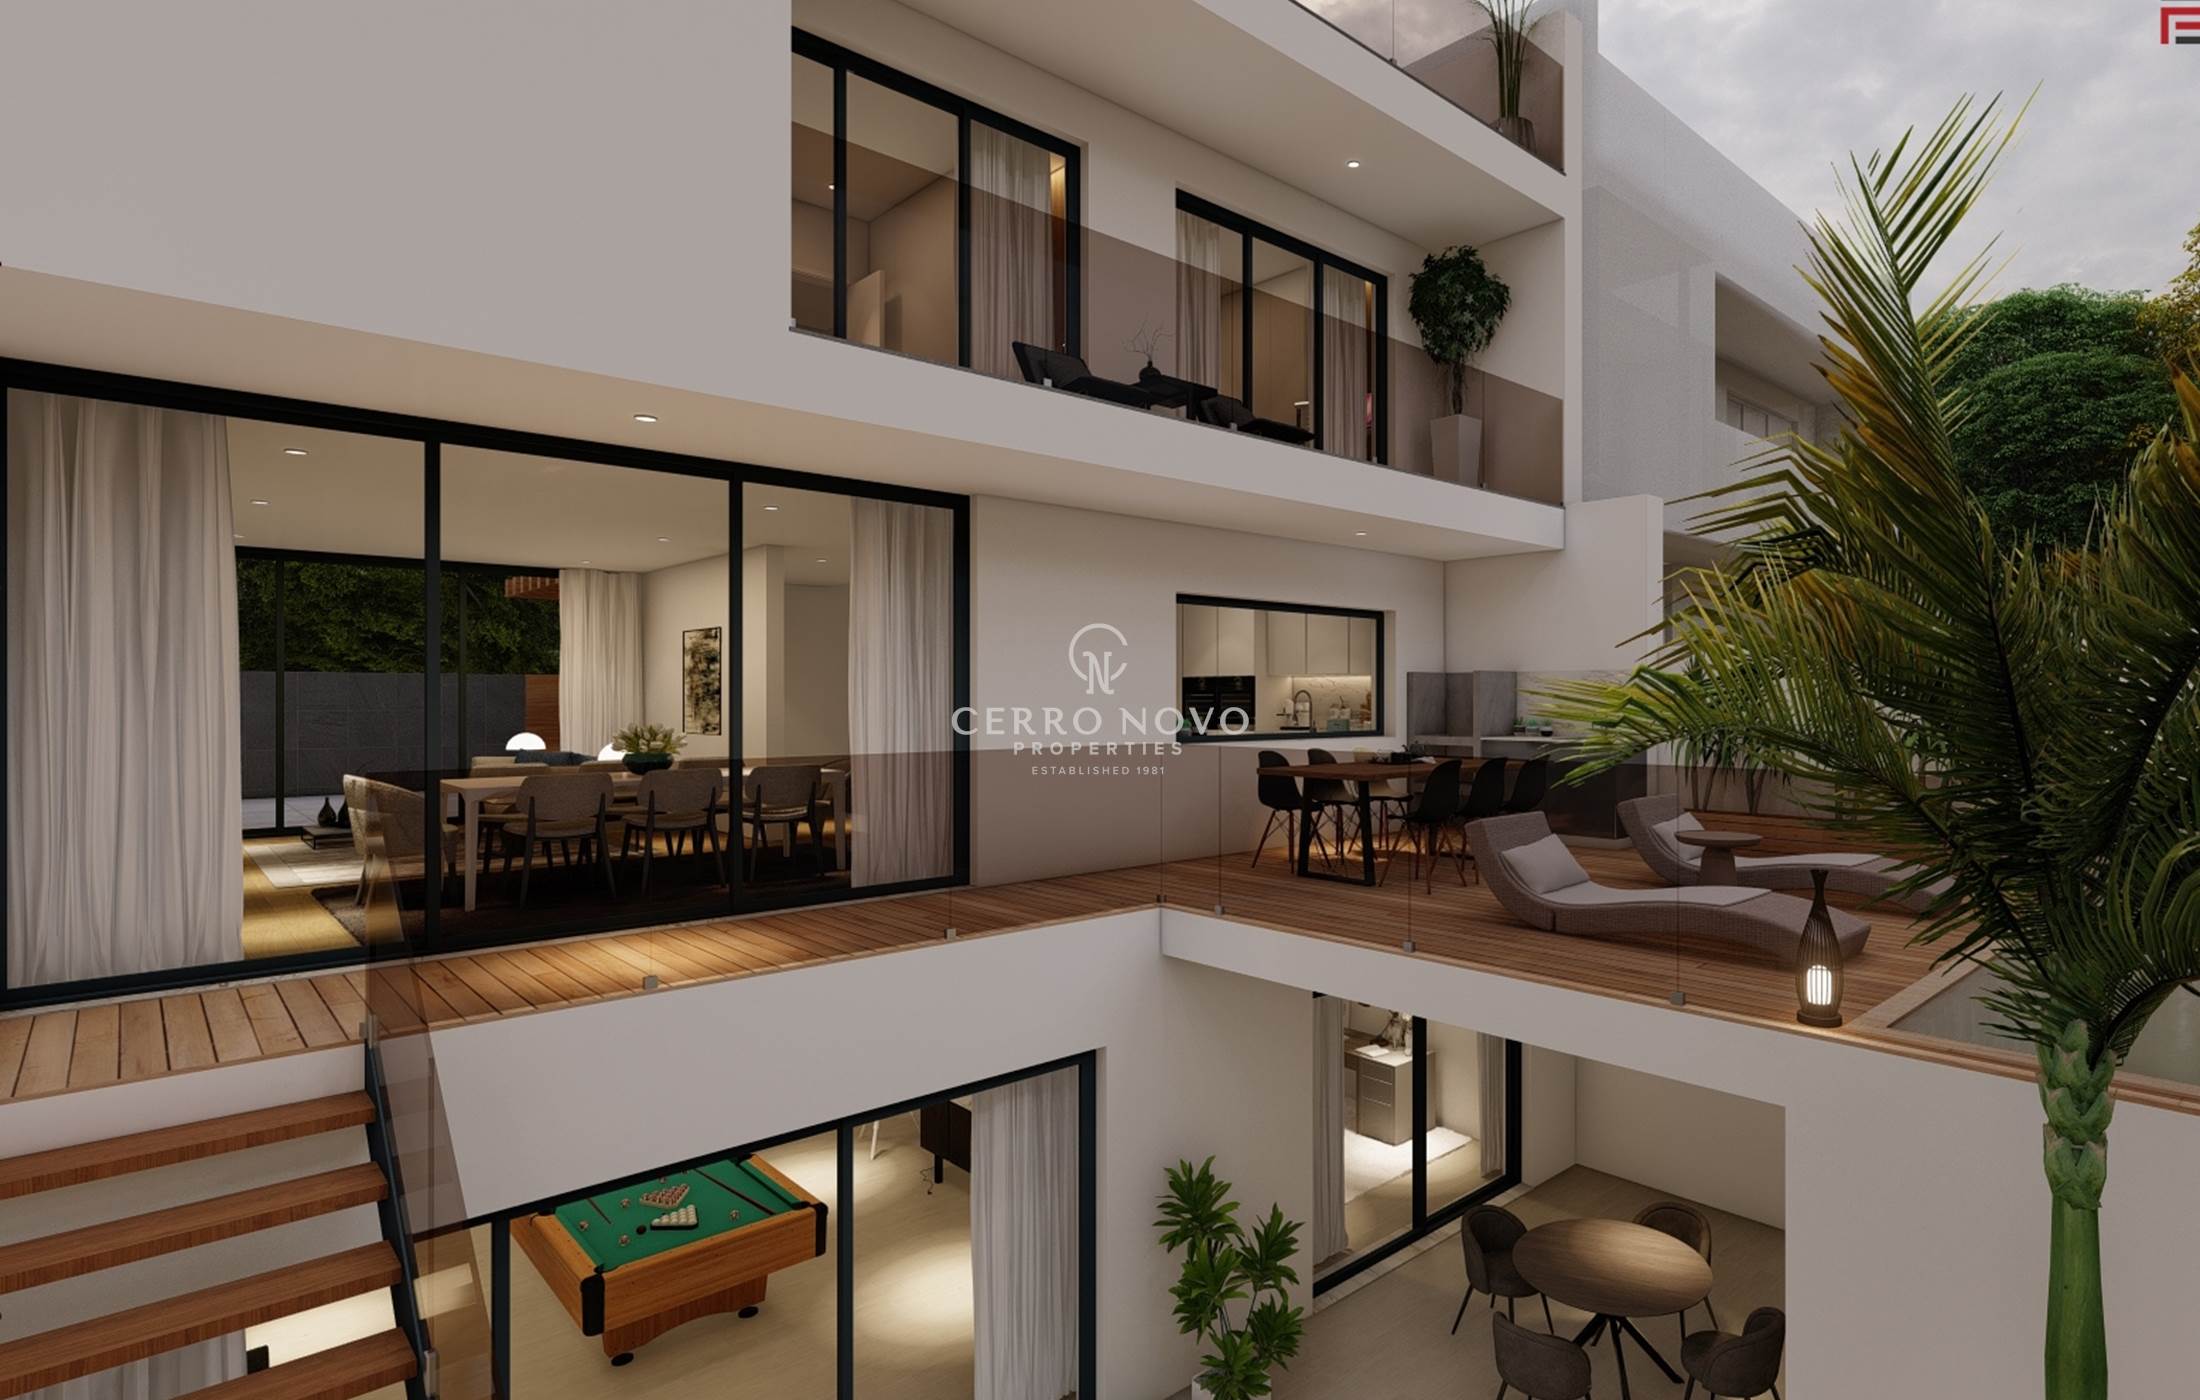 A brand-new luxury contemporary residence in Faro – in final construction phase